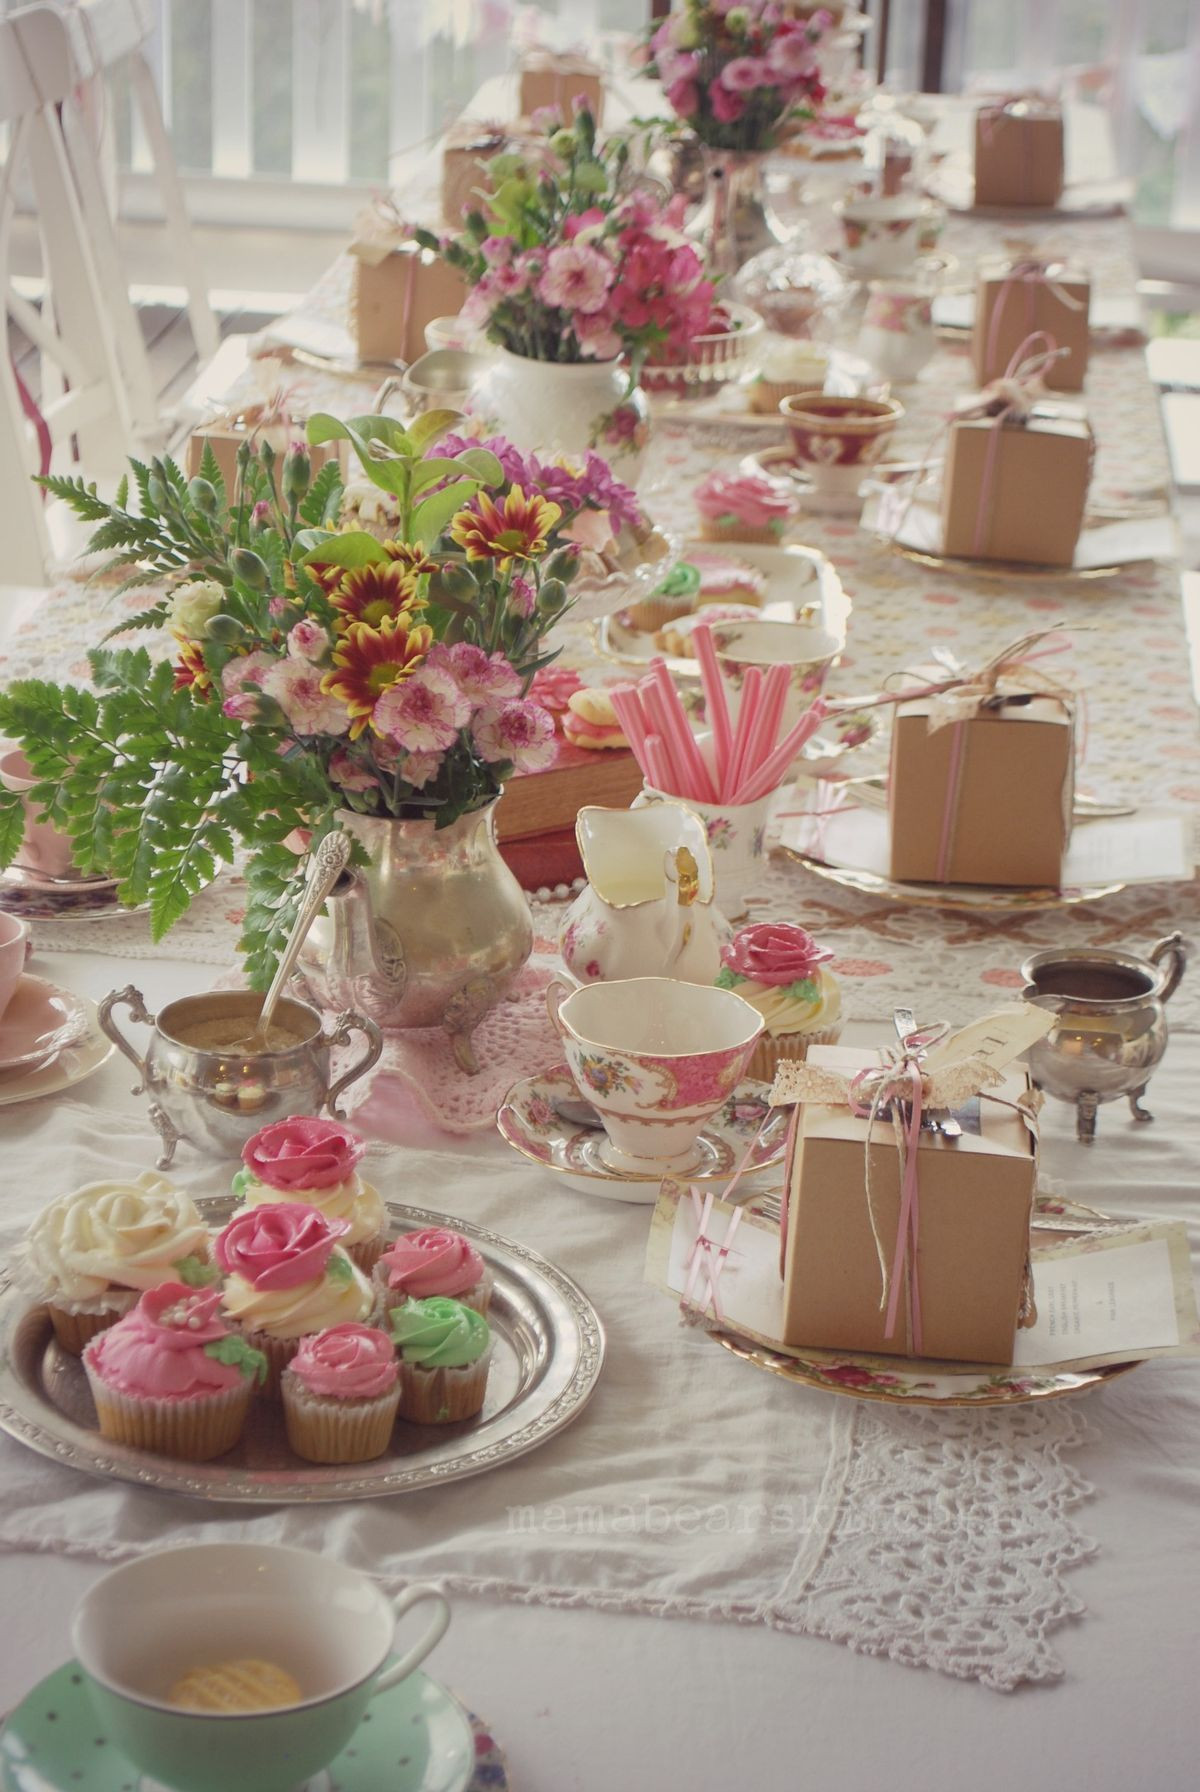 Tea Party Table Settings Ideas
 Pin by Joy Ray on Tablescape in 2019